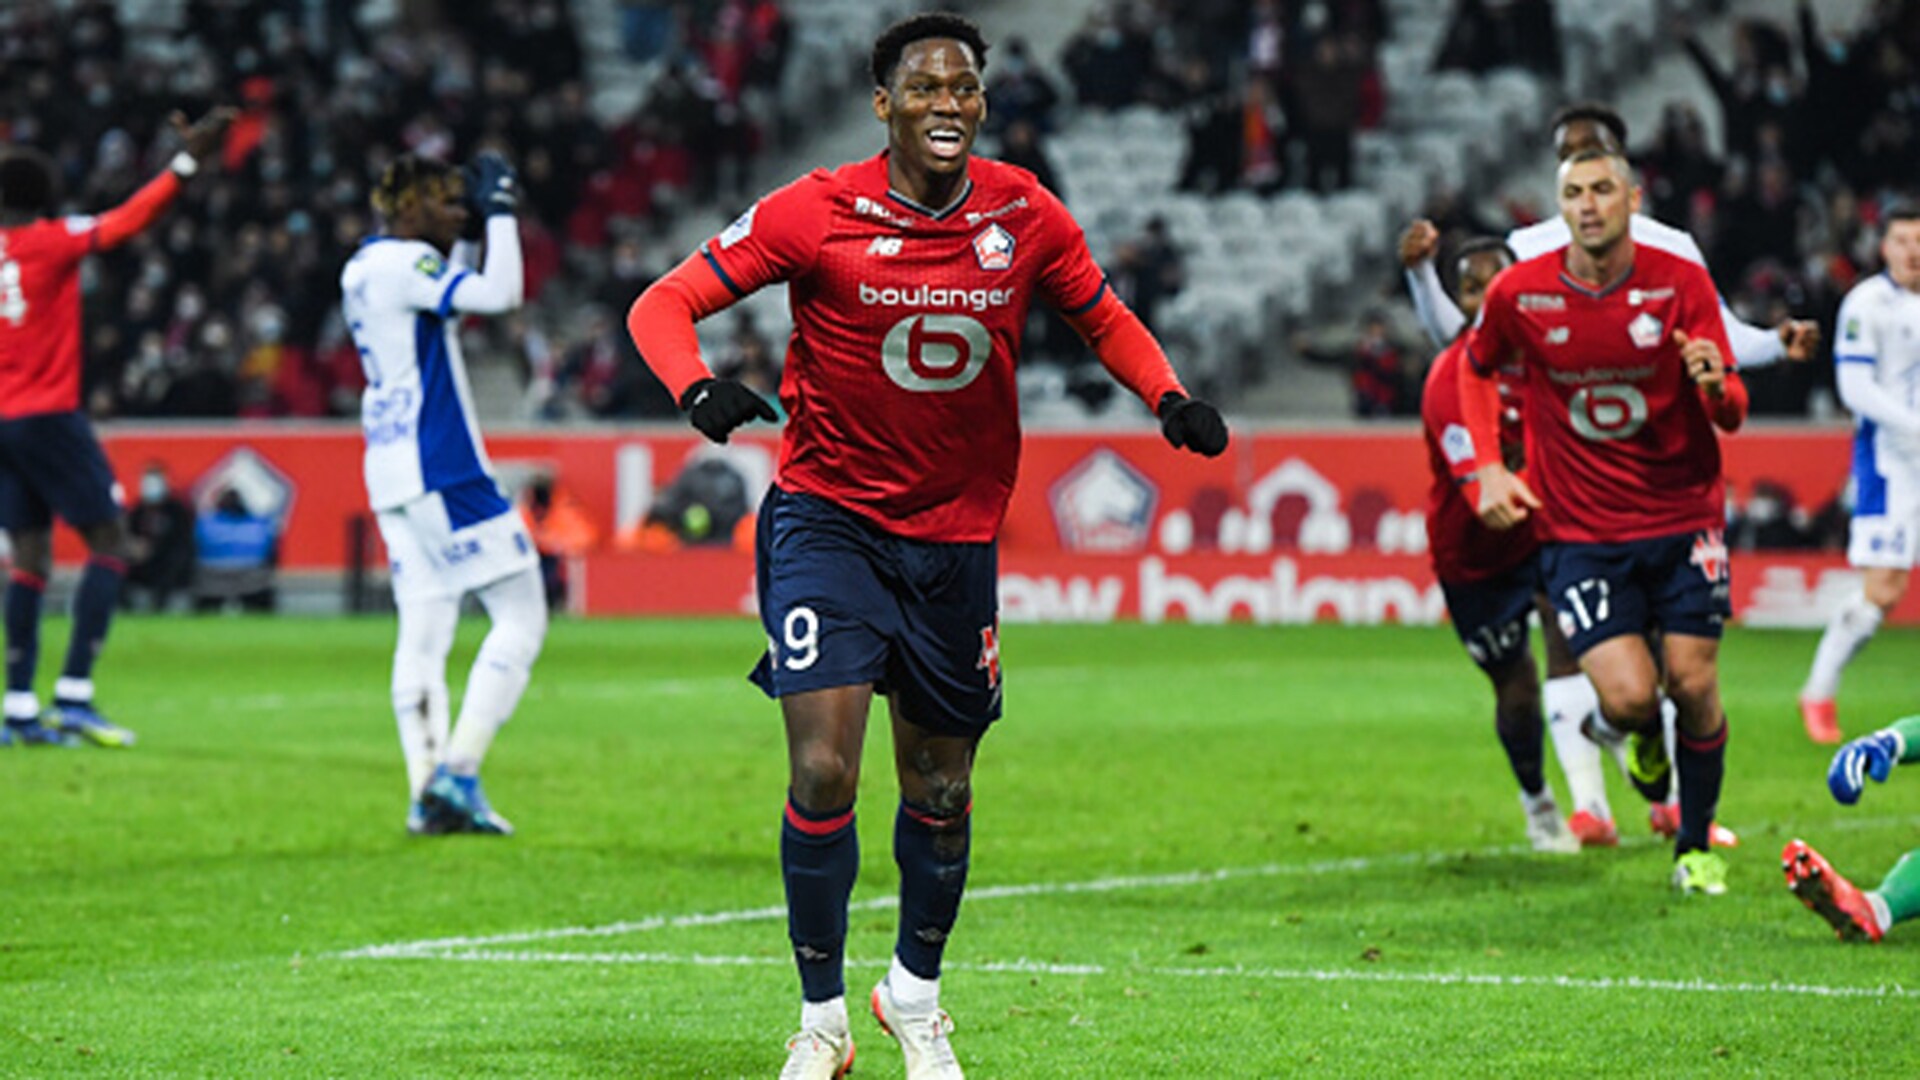 ligue 1 lille 2 troyes 1 video tsn